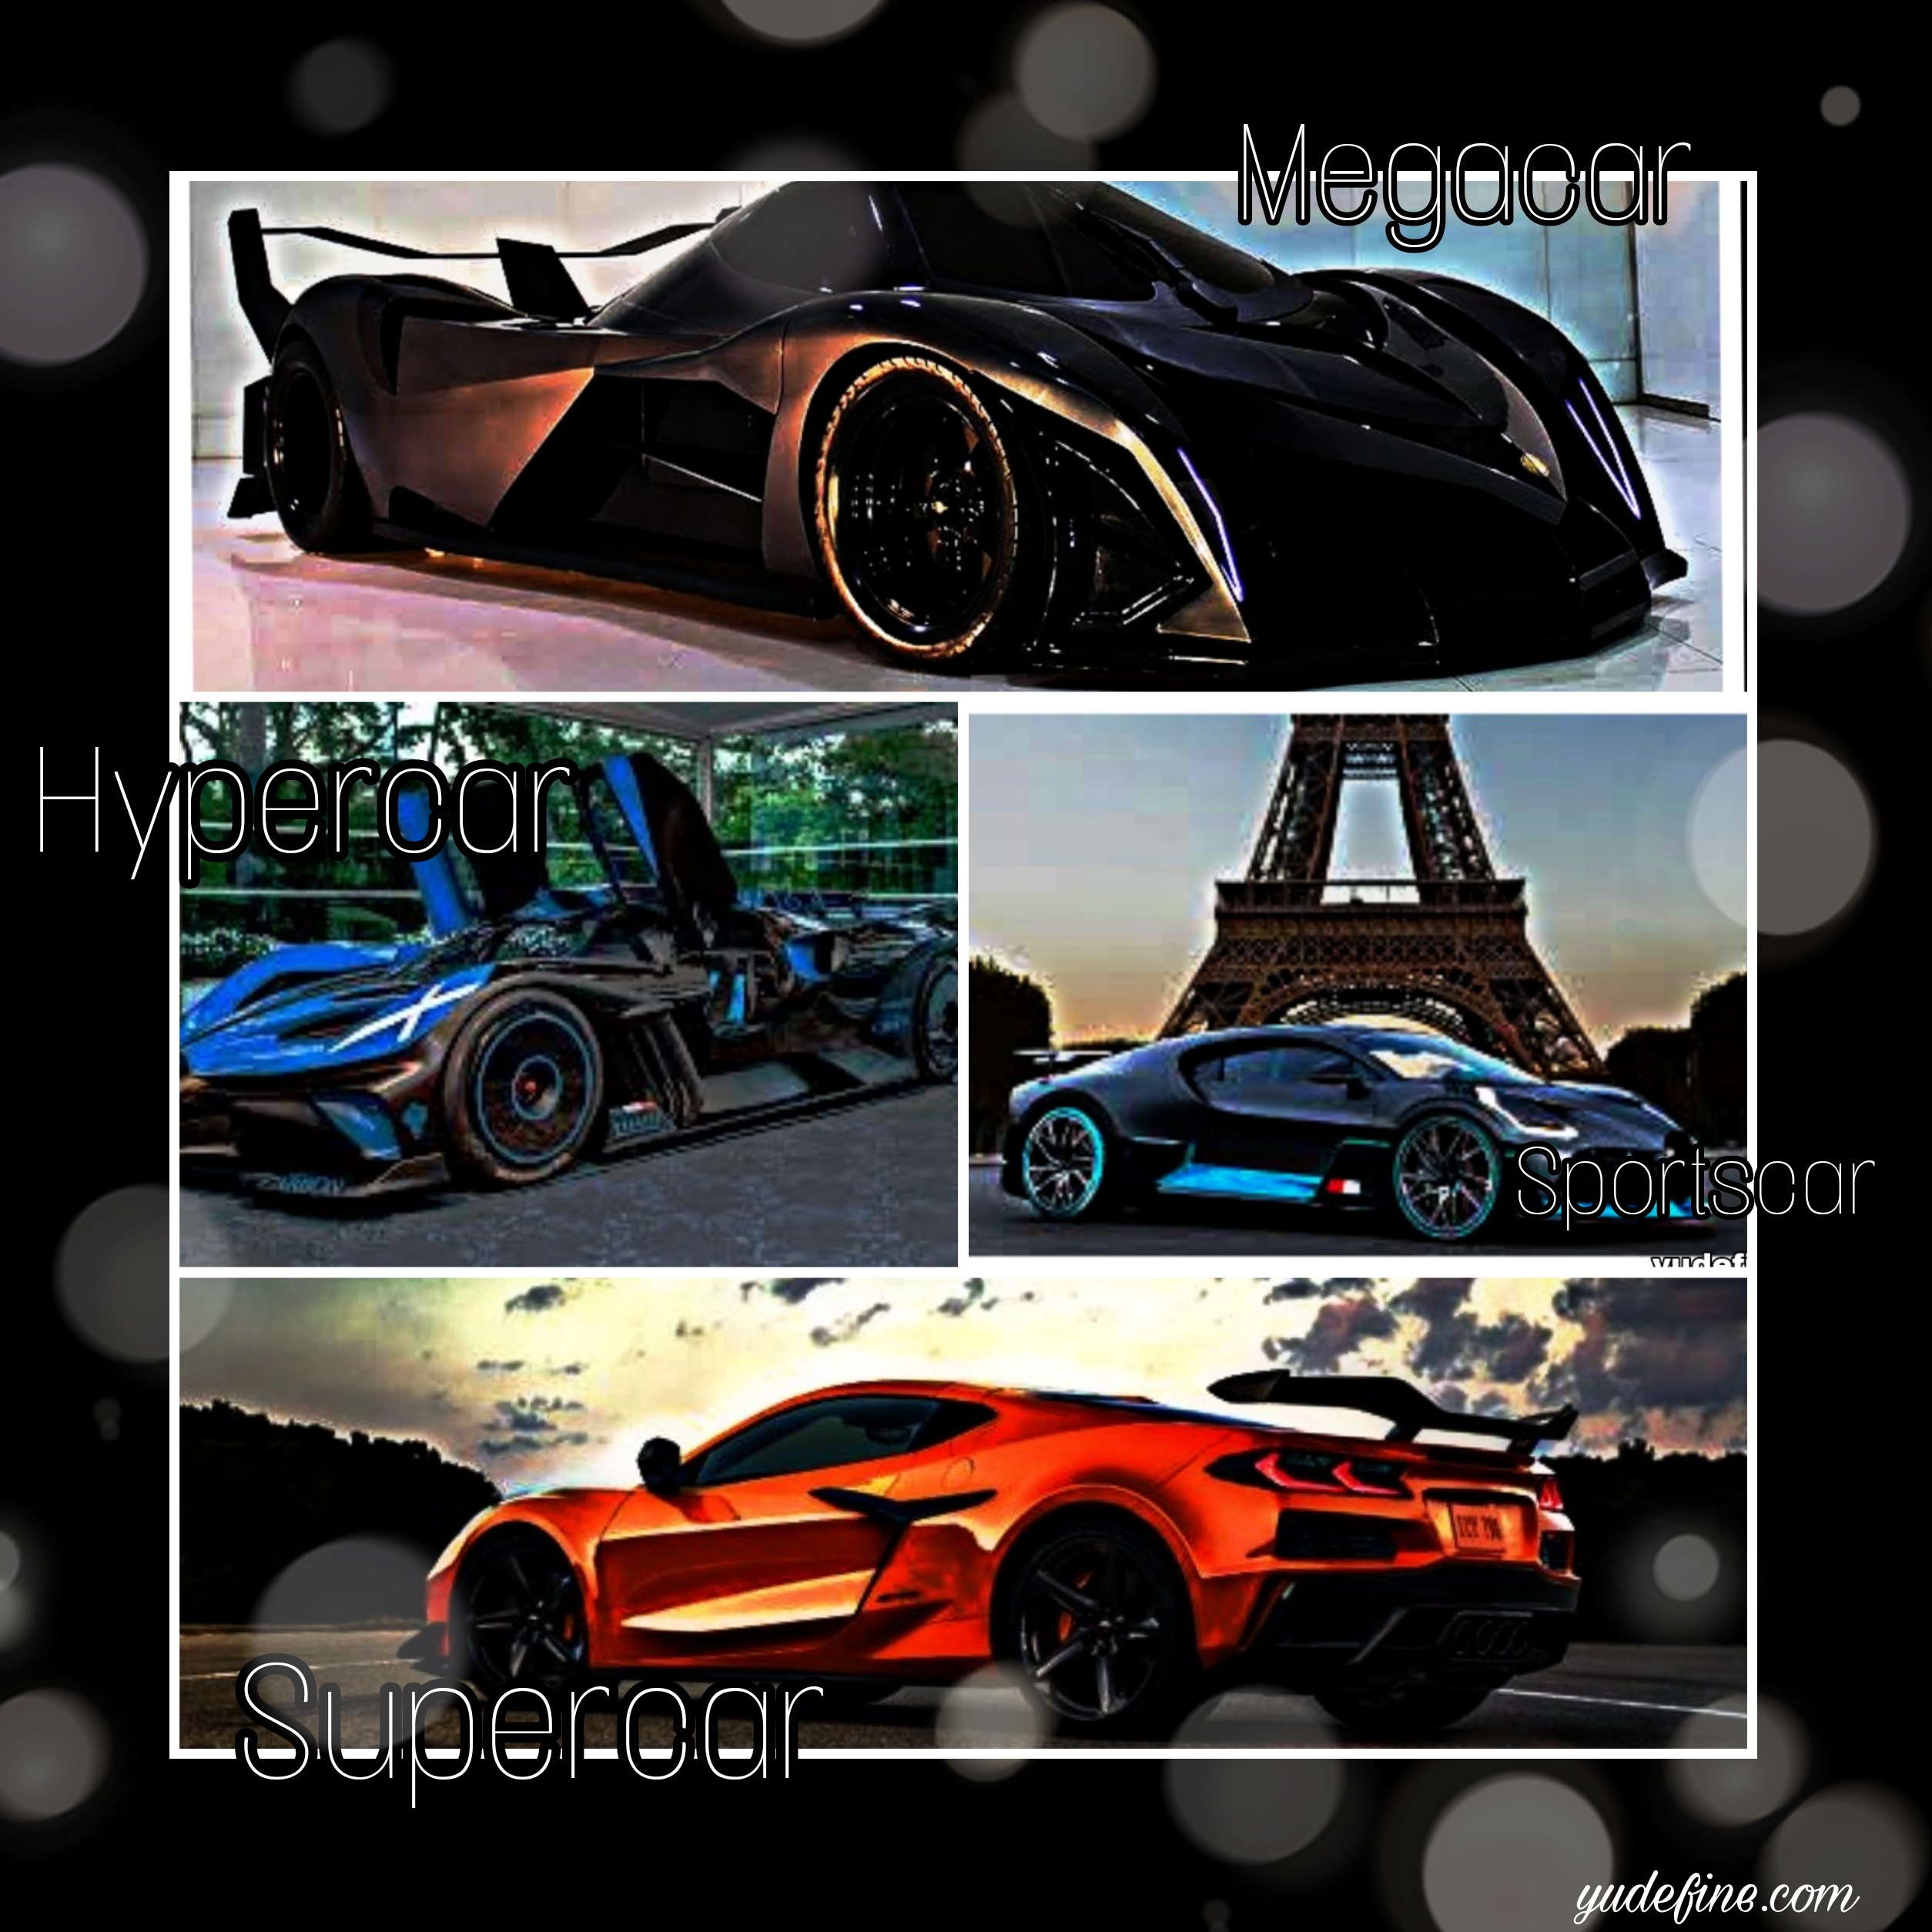 The Different Types Of Cars: hypercars, megacars, supercars